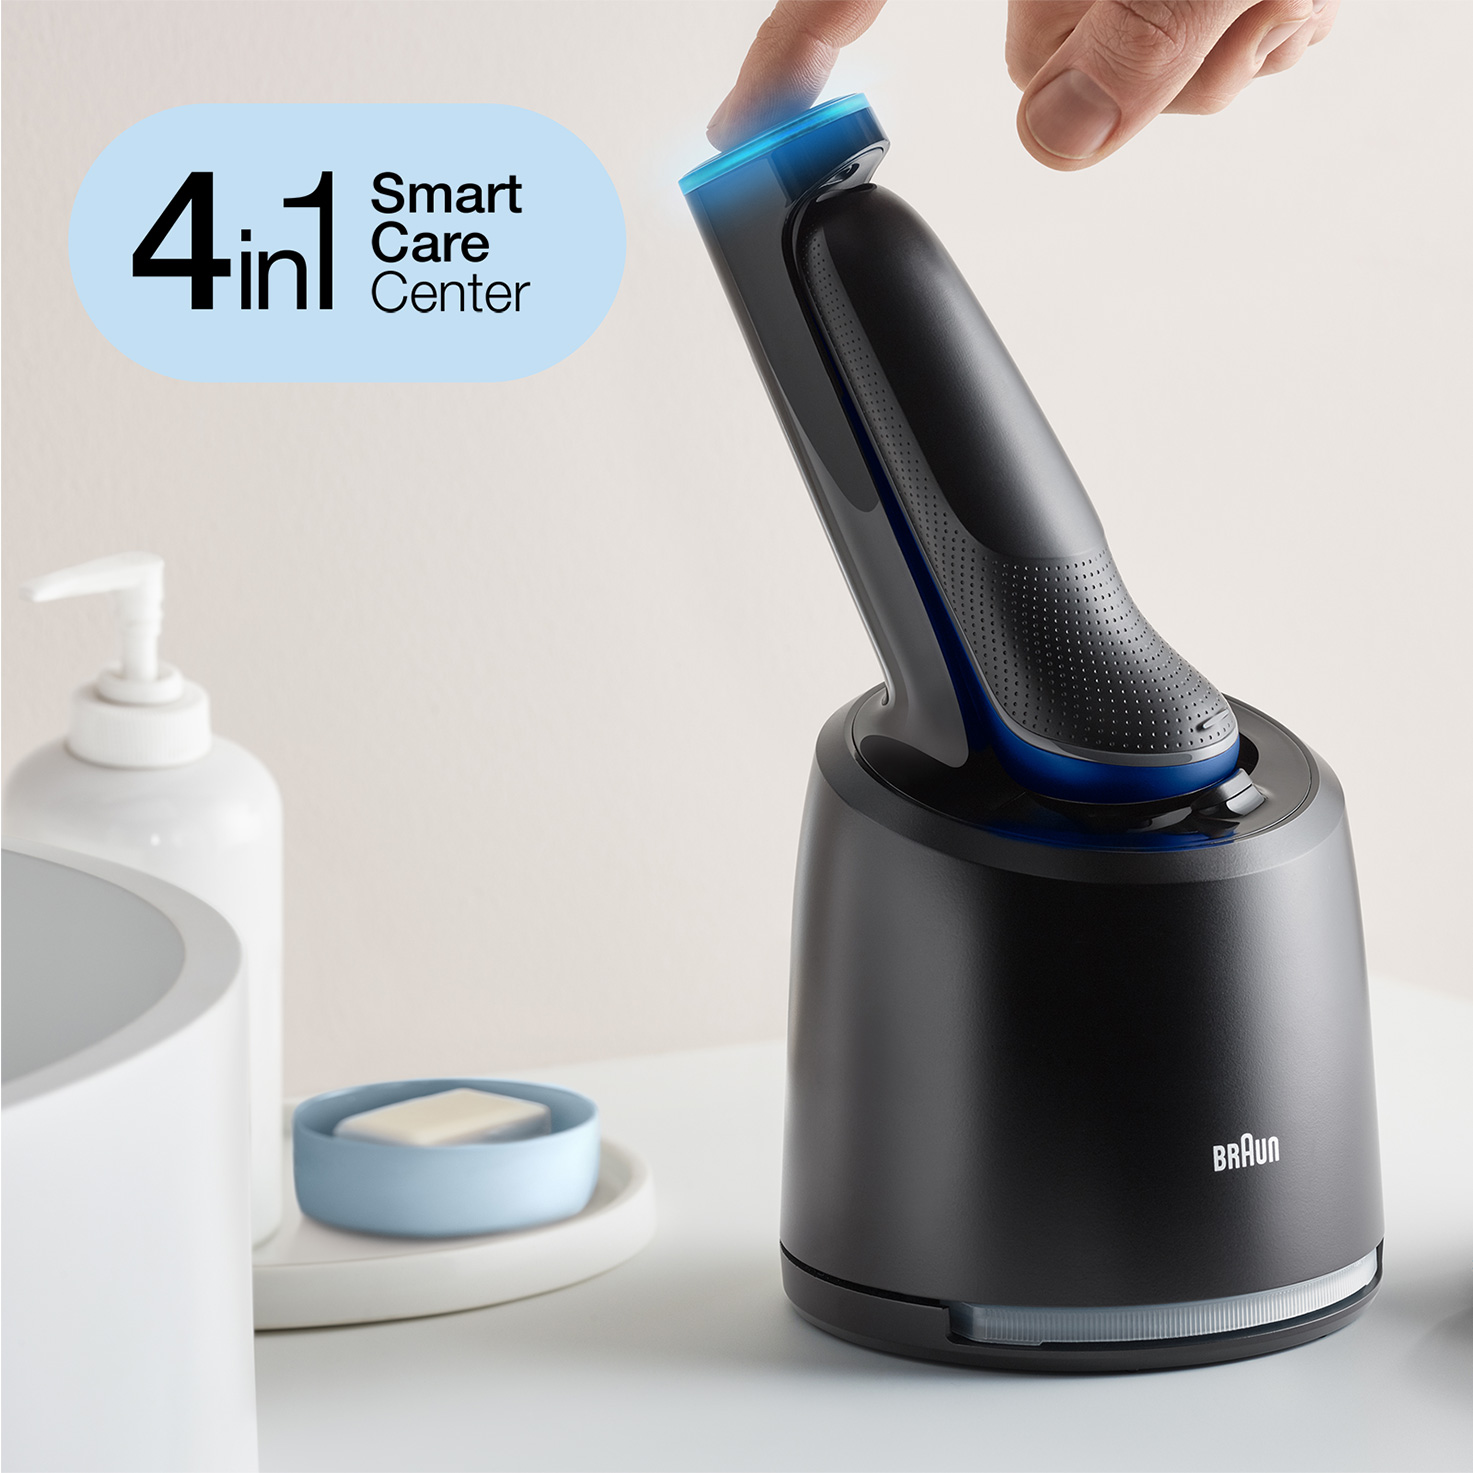 Series 6 61-B7200cc Wet & SmartCare with center shaver and Dry 1 attachment